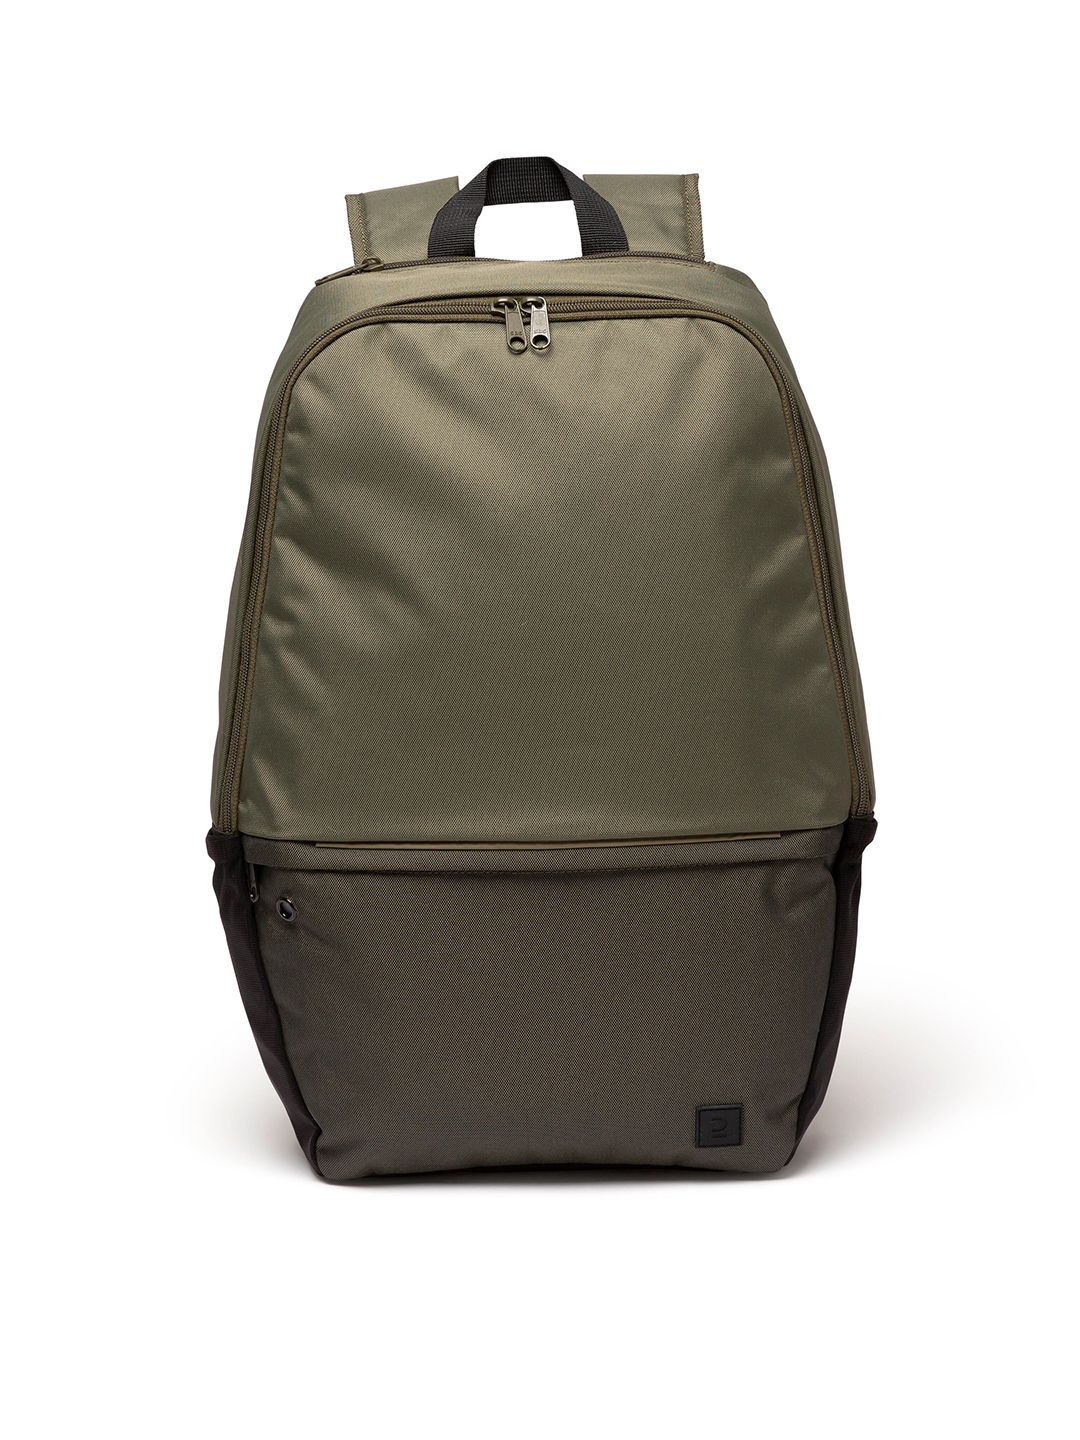 Kipsta By Decathlon Unisex Khaki Solid Backpack Price in India